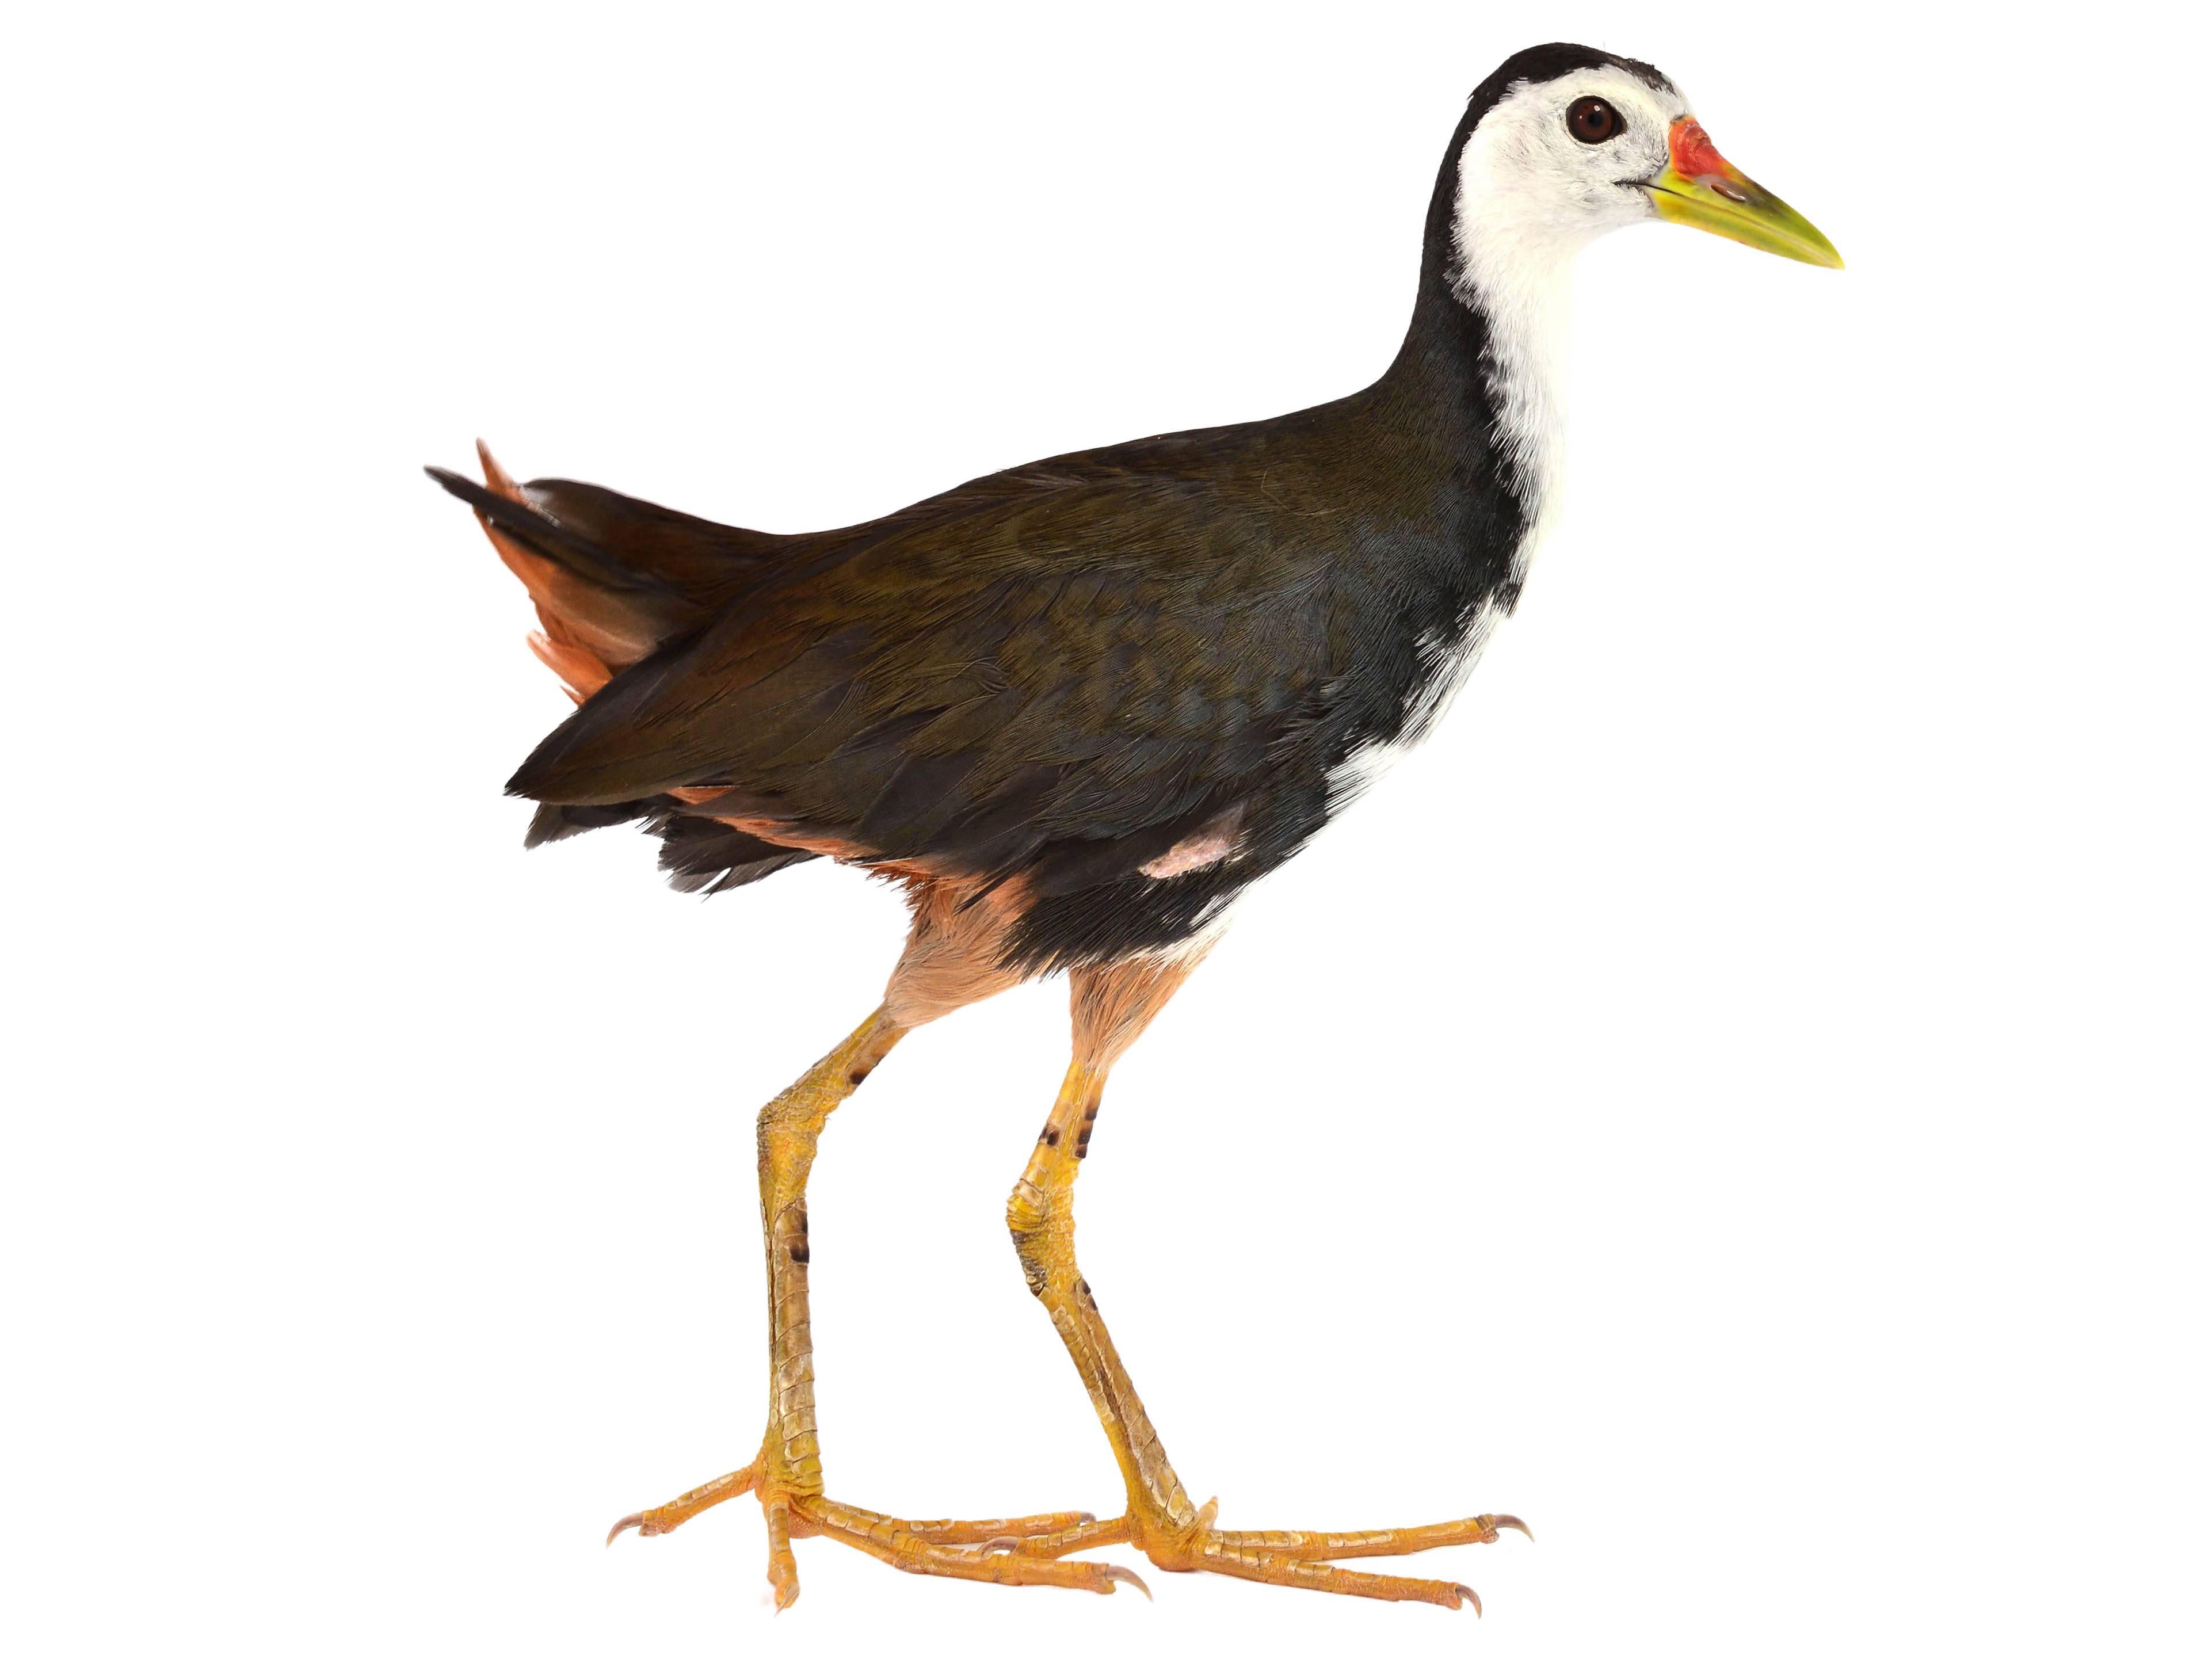 A photo of a White-breasted Waterhen (Amaurornis phoenicurus)